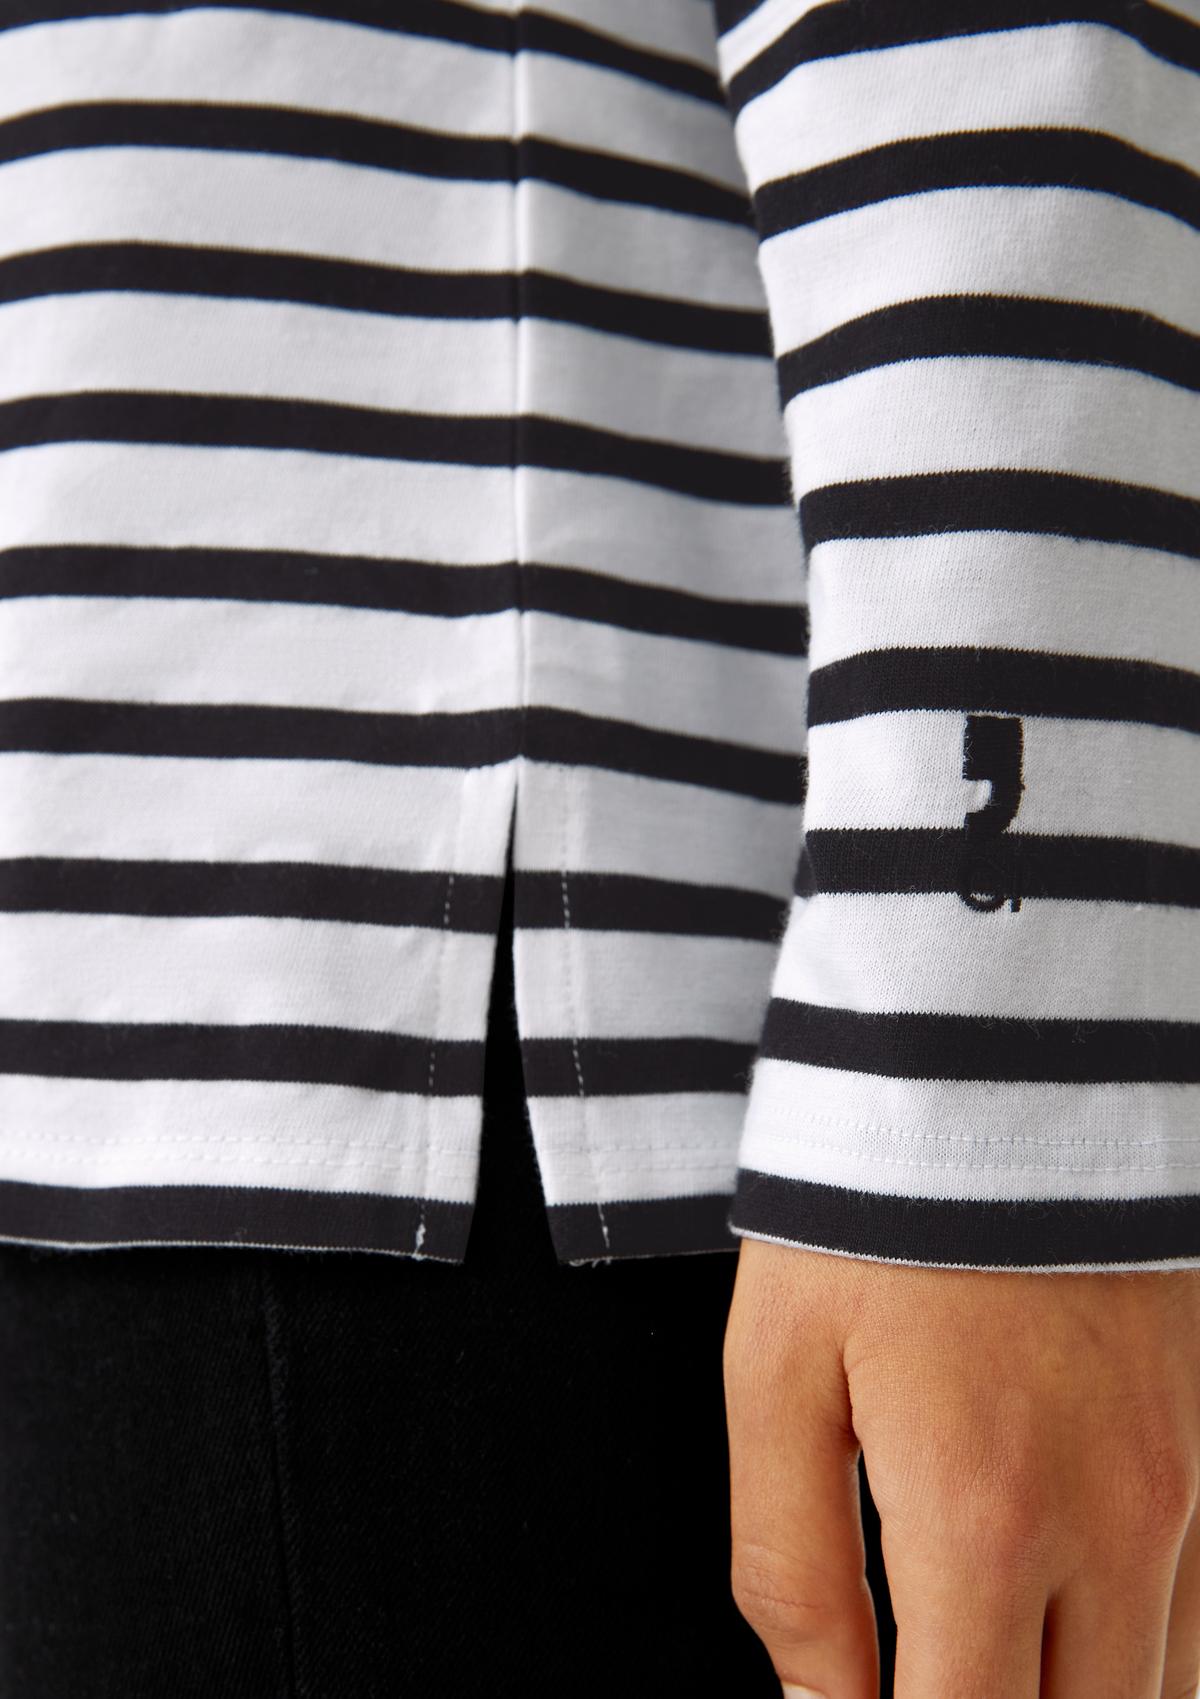 comma Long sleeve top with striped pattern